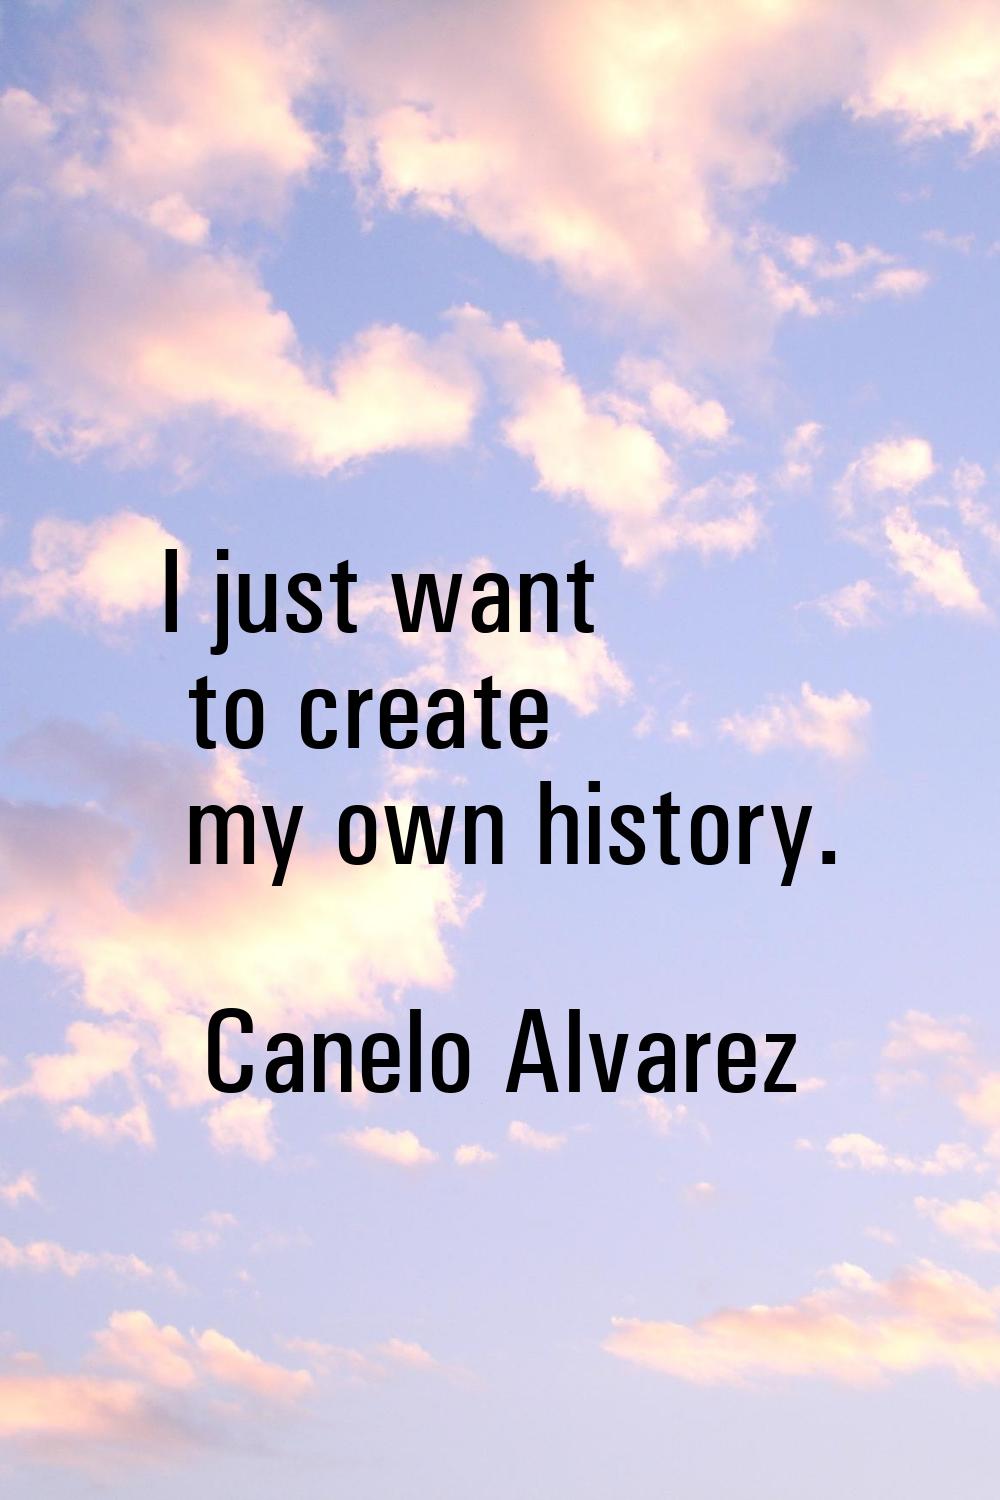 I just want to create my own history.